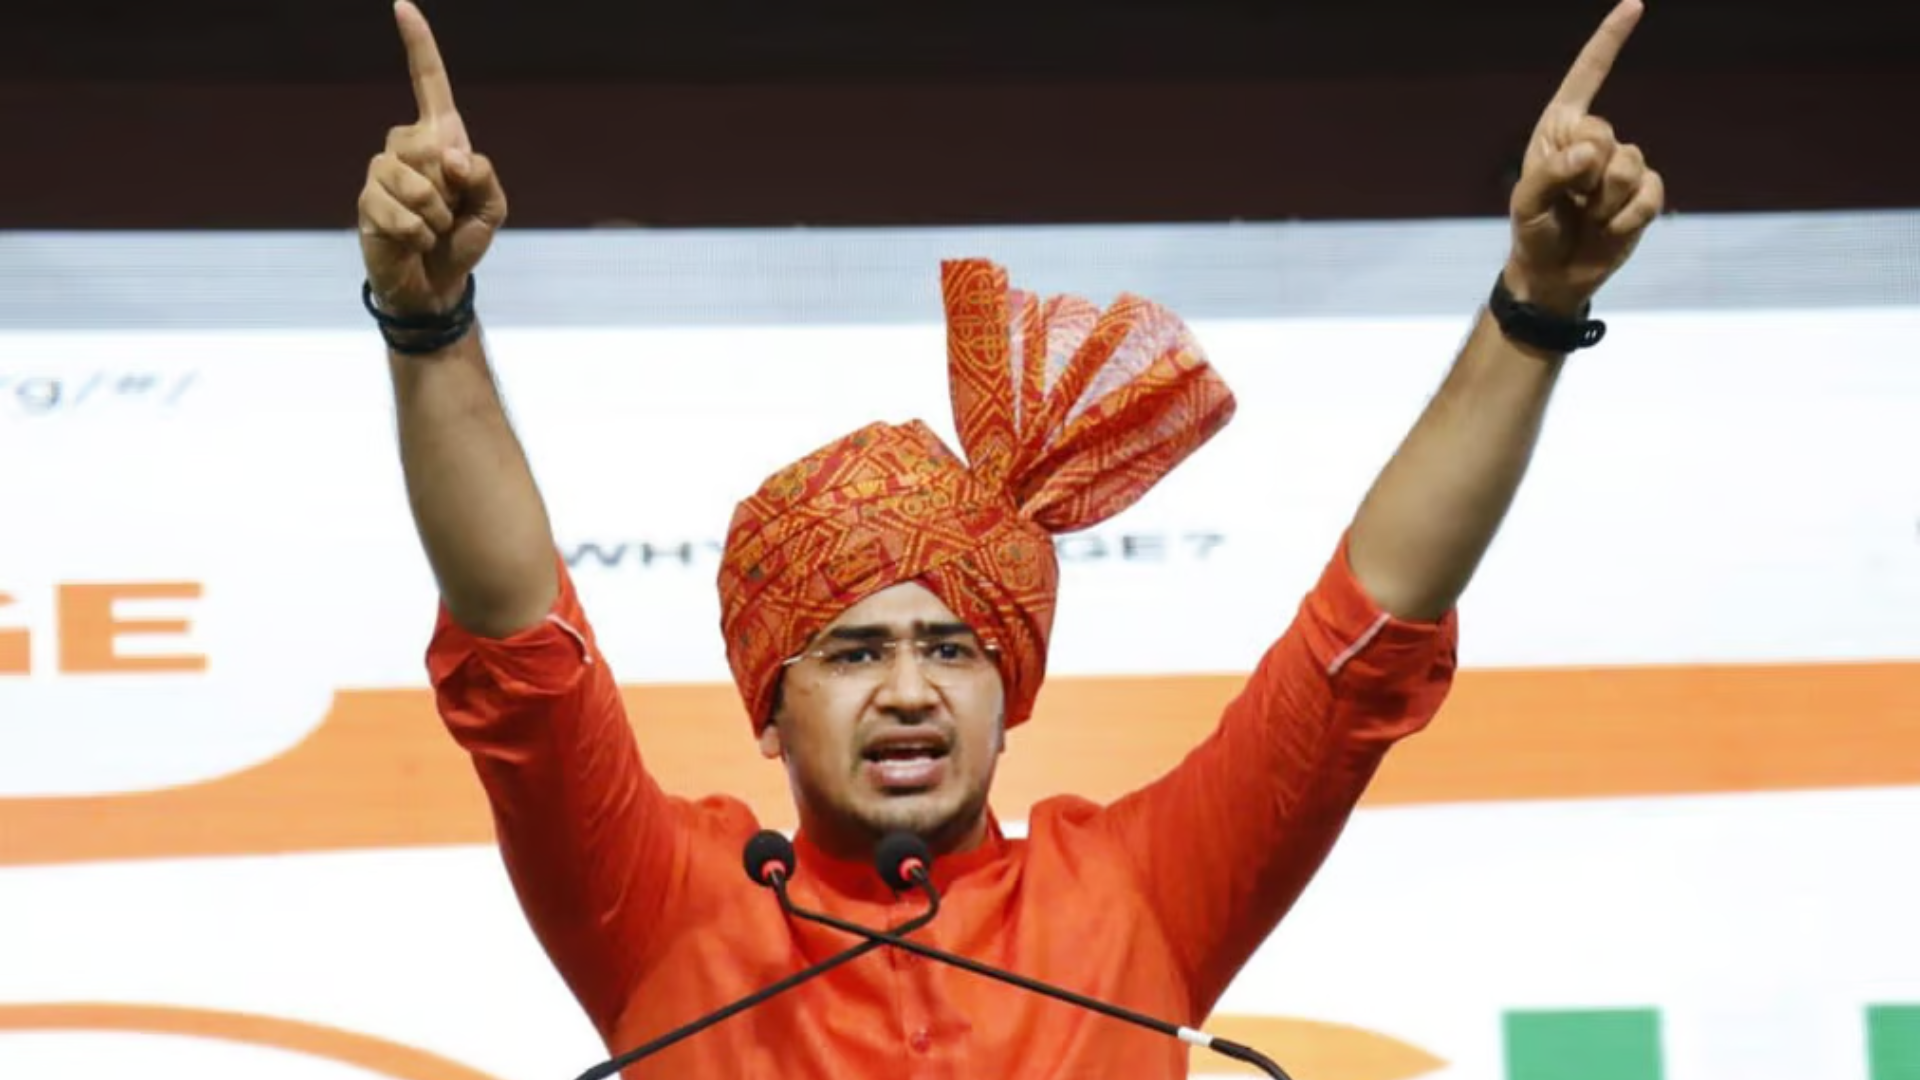 Bengaluru Event Turns Chaotic: BJP's Tejasvi Surya Heckled, Forced To Leave; Election Commission Complaint Lodged